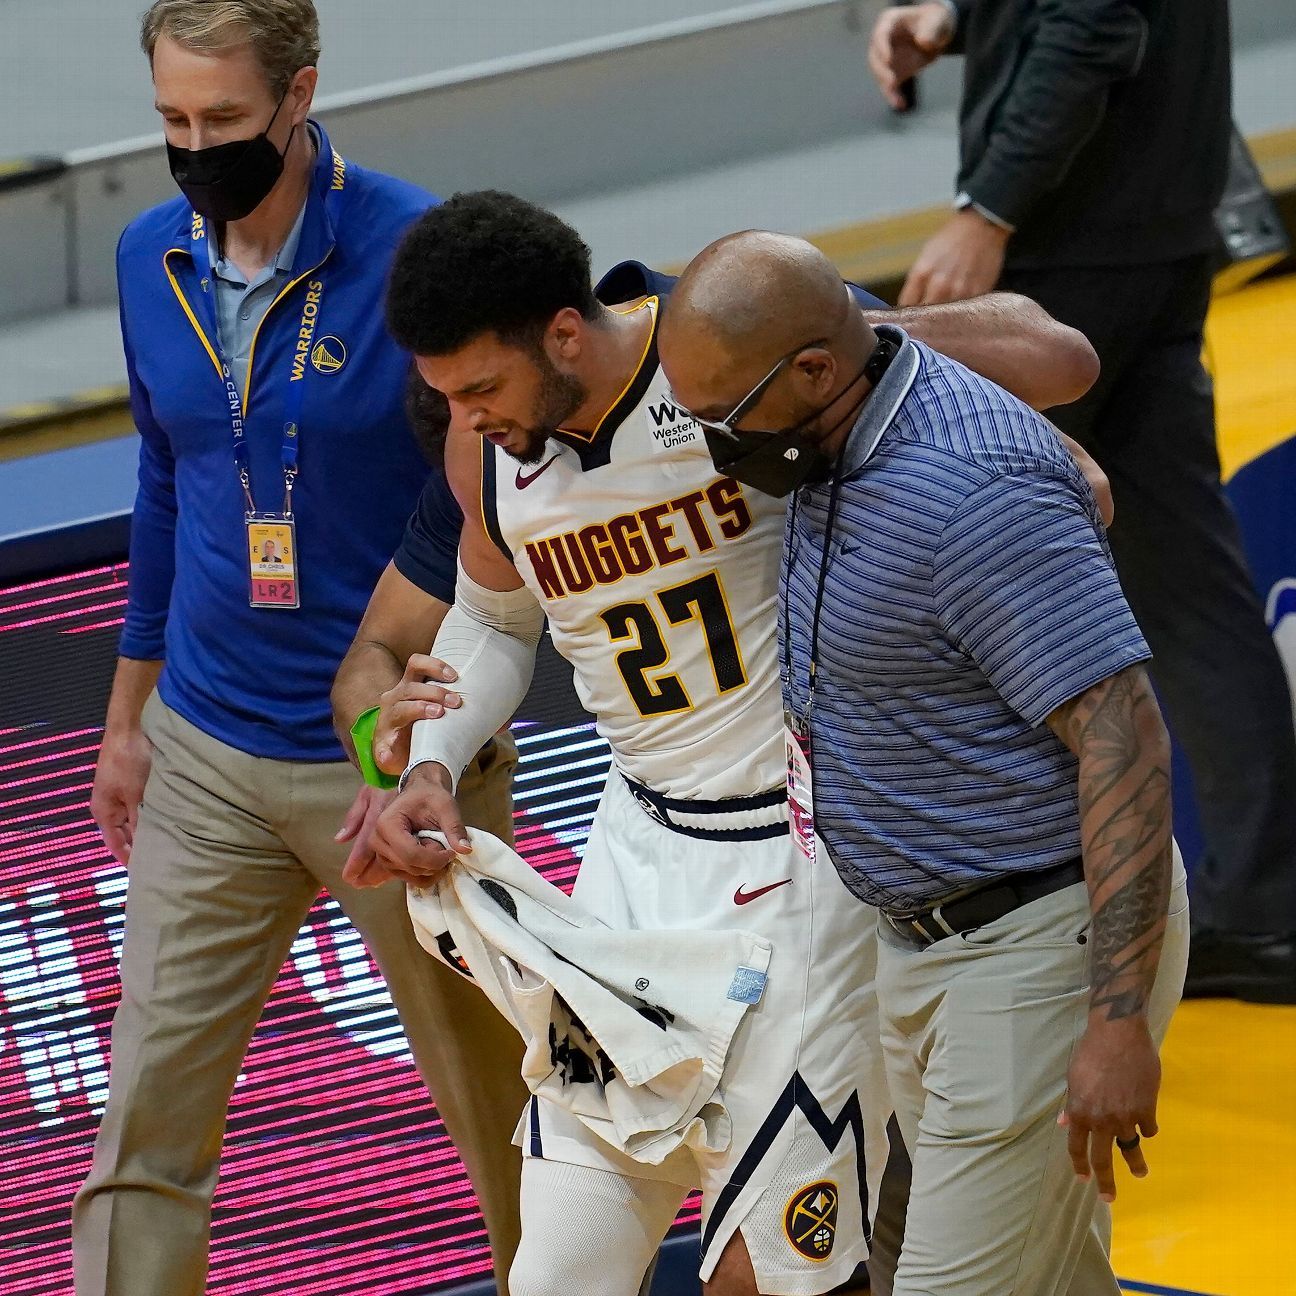 Nuggets star Jamal Murray is ‘crushed’ after the ACL injury that ended the season, says Michael Malone